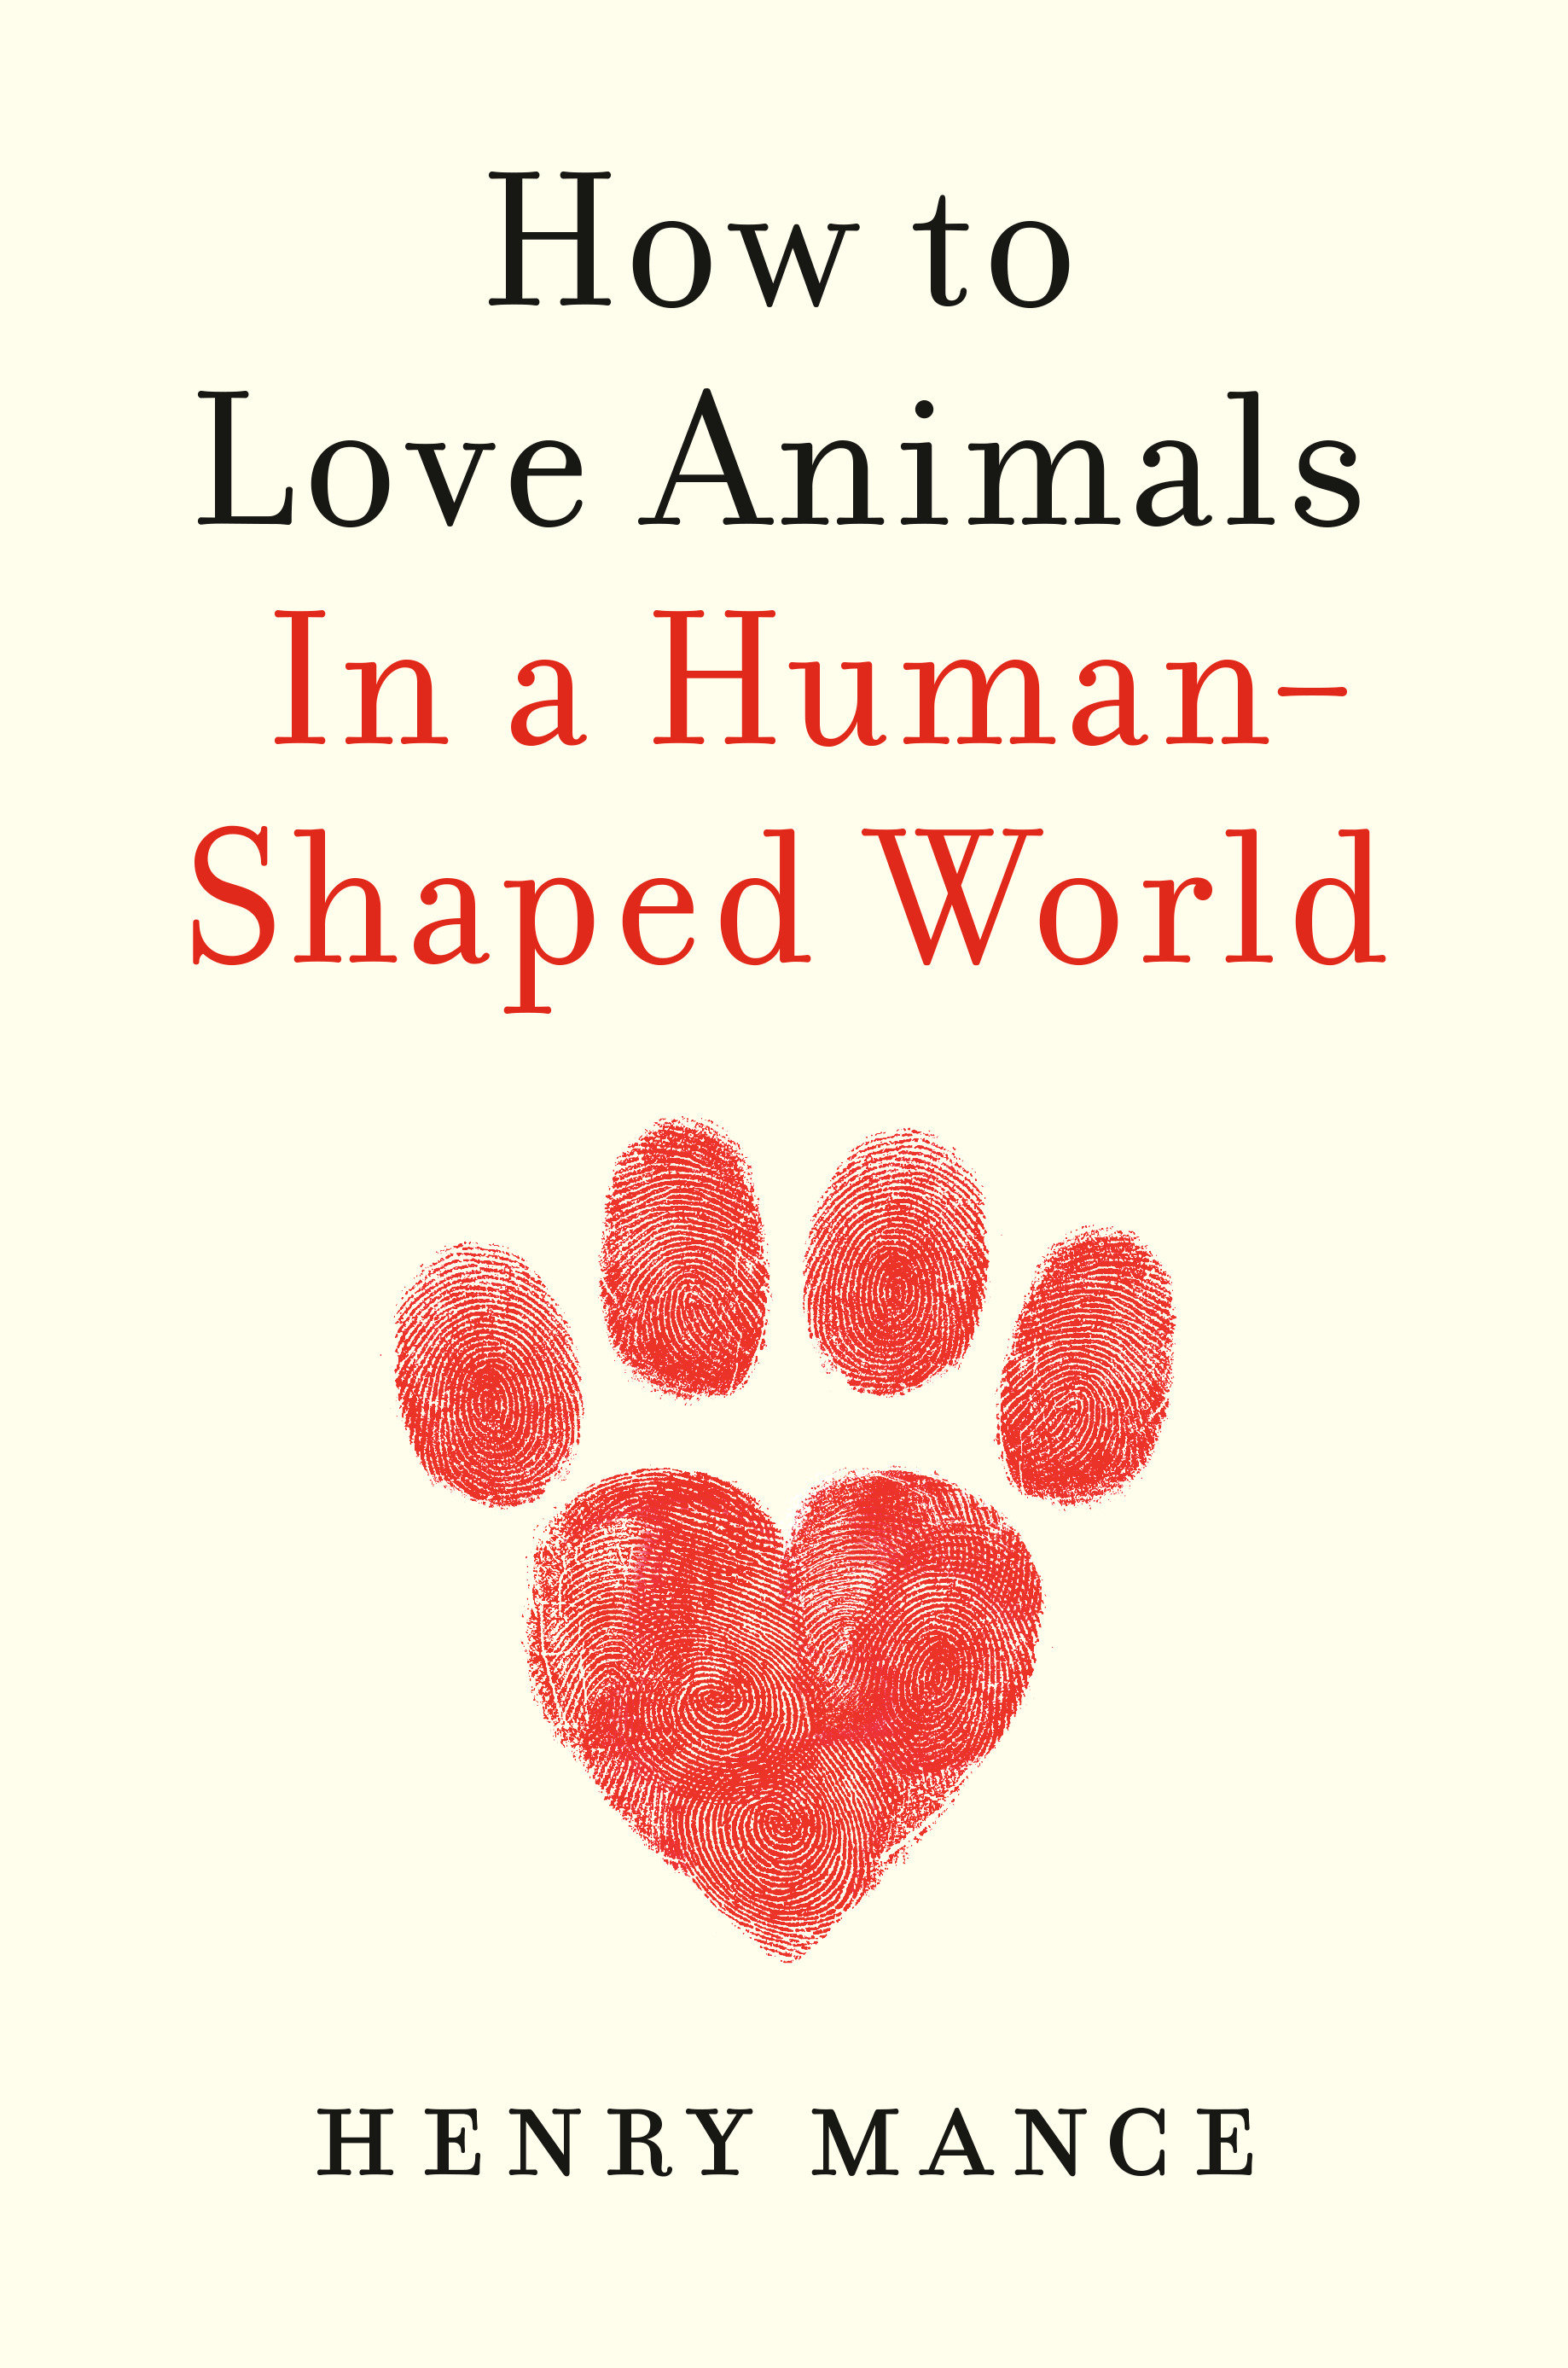 How To Love Animals (Hardcover Book)